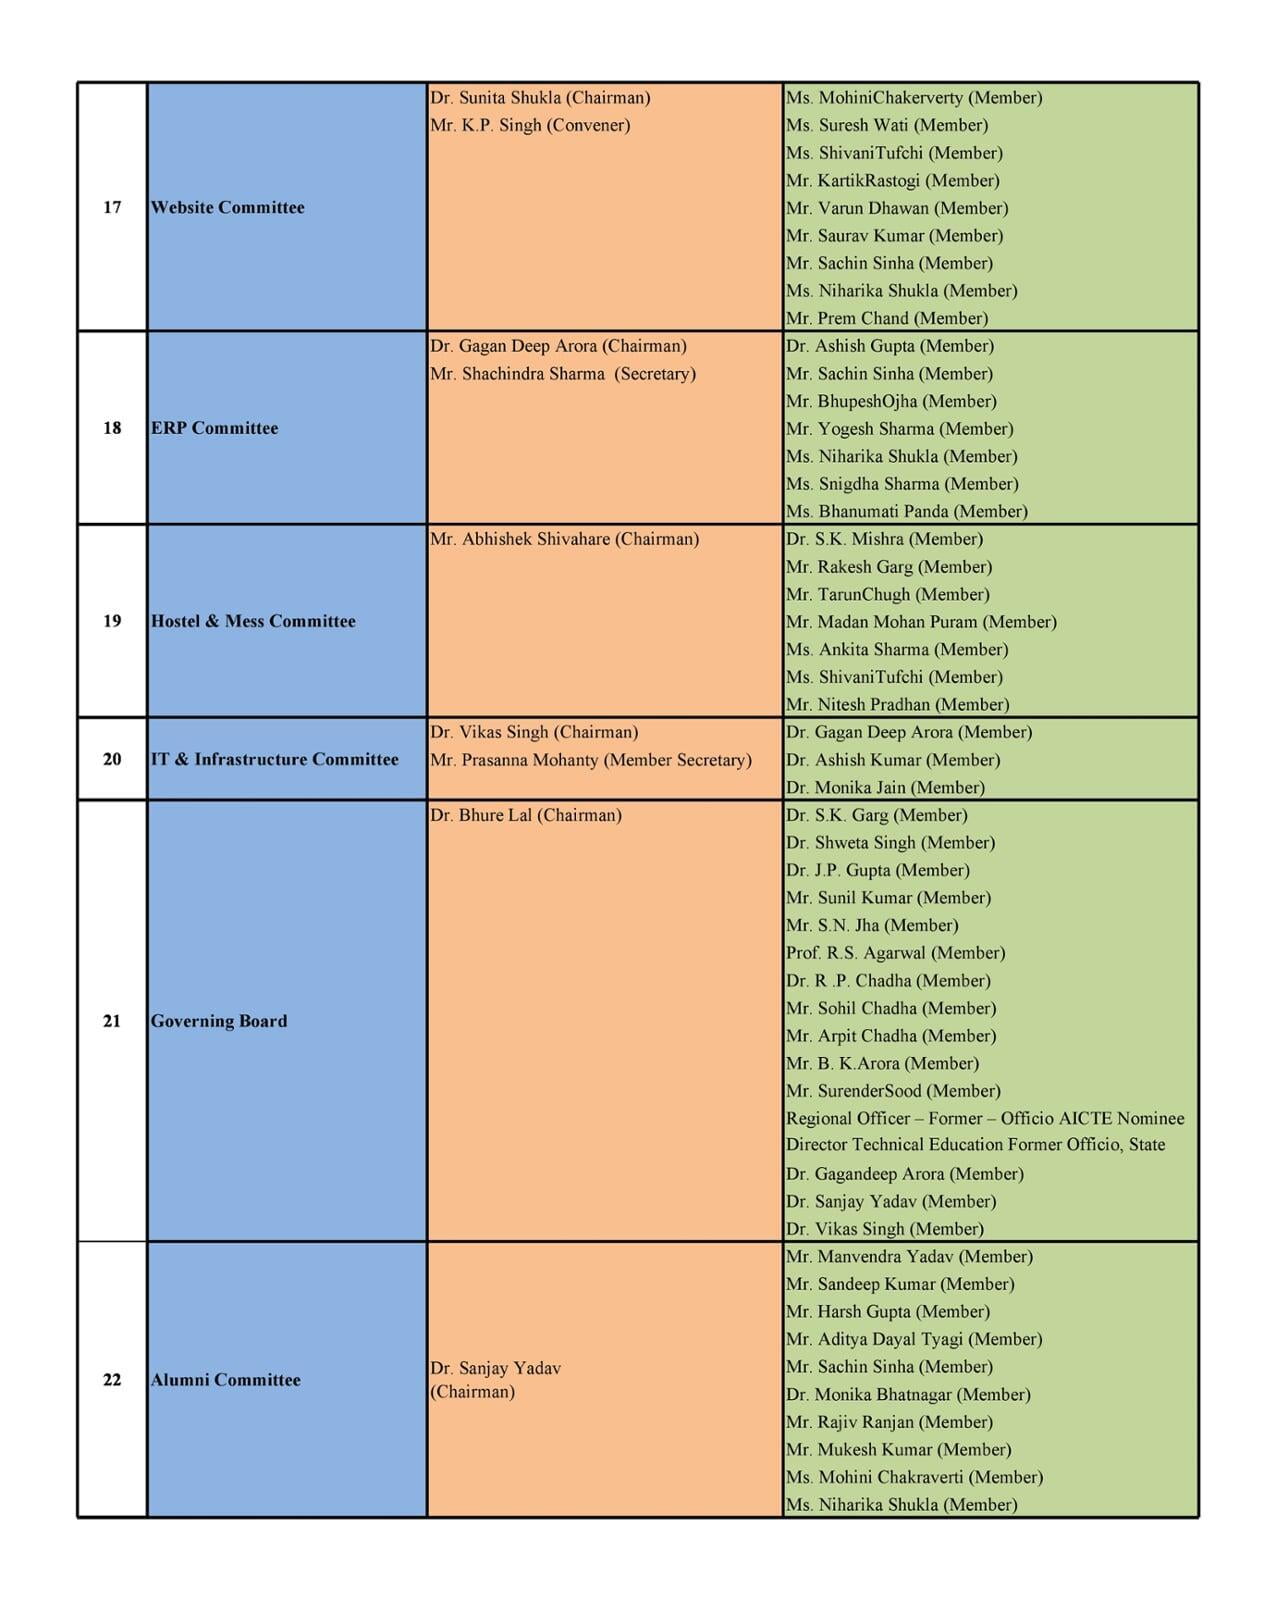 List of Committees at ITS